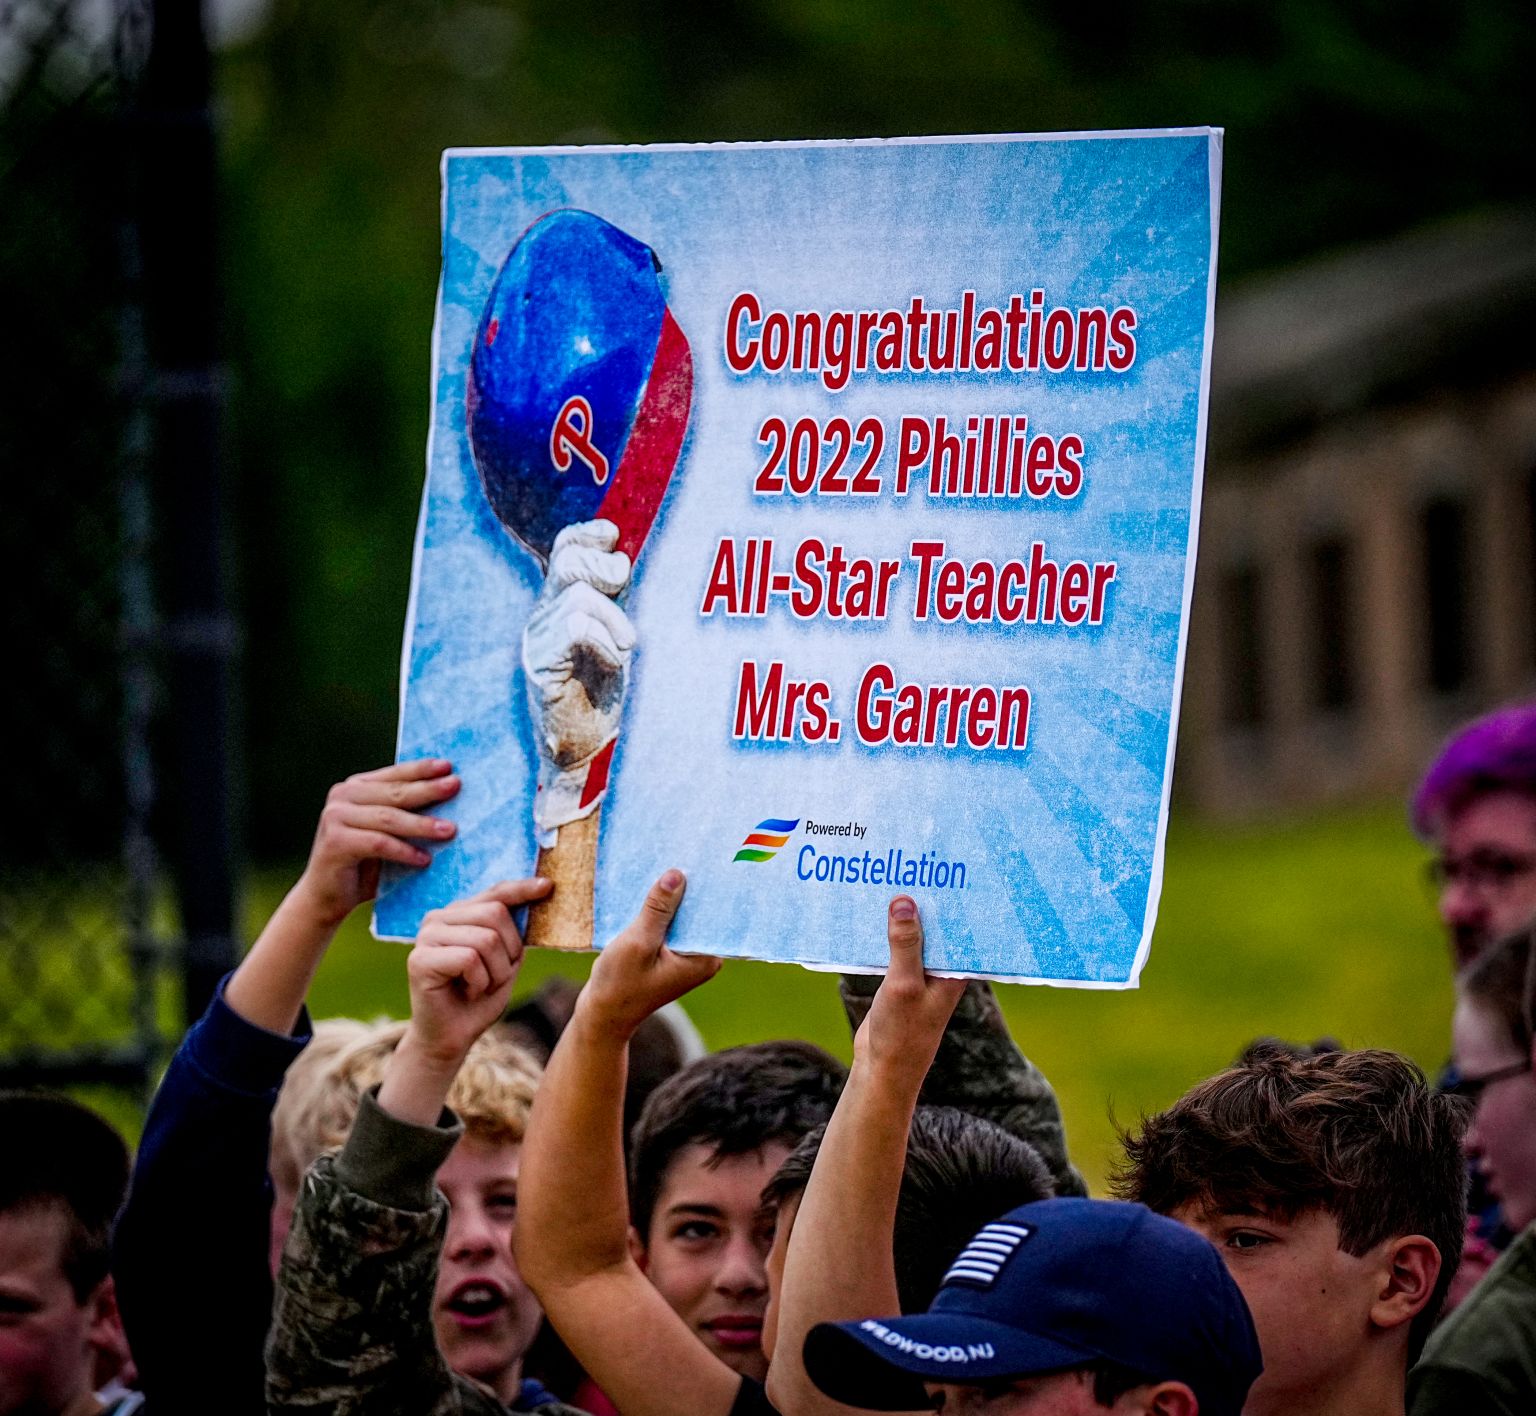 N.J. teacher is a Phillies Ballgirl. Look for her on the field